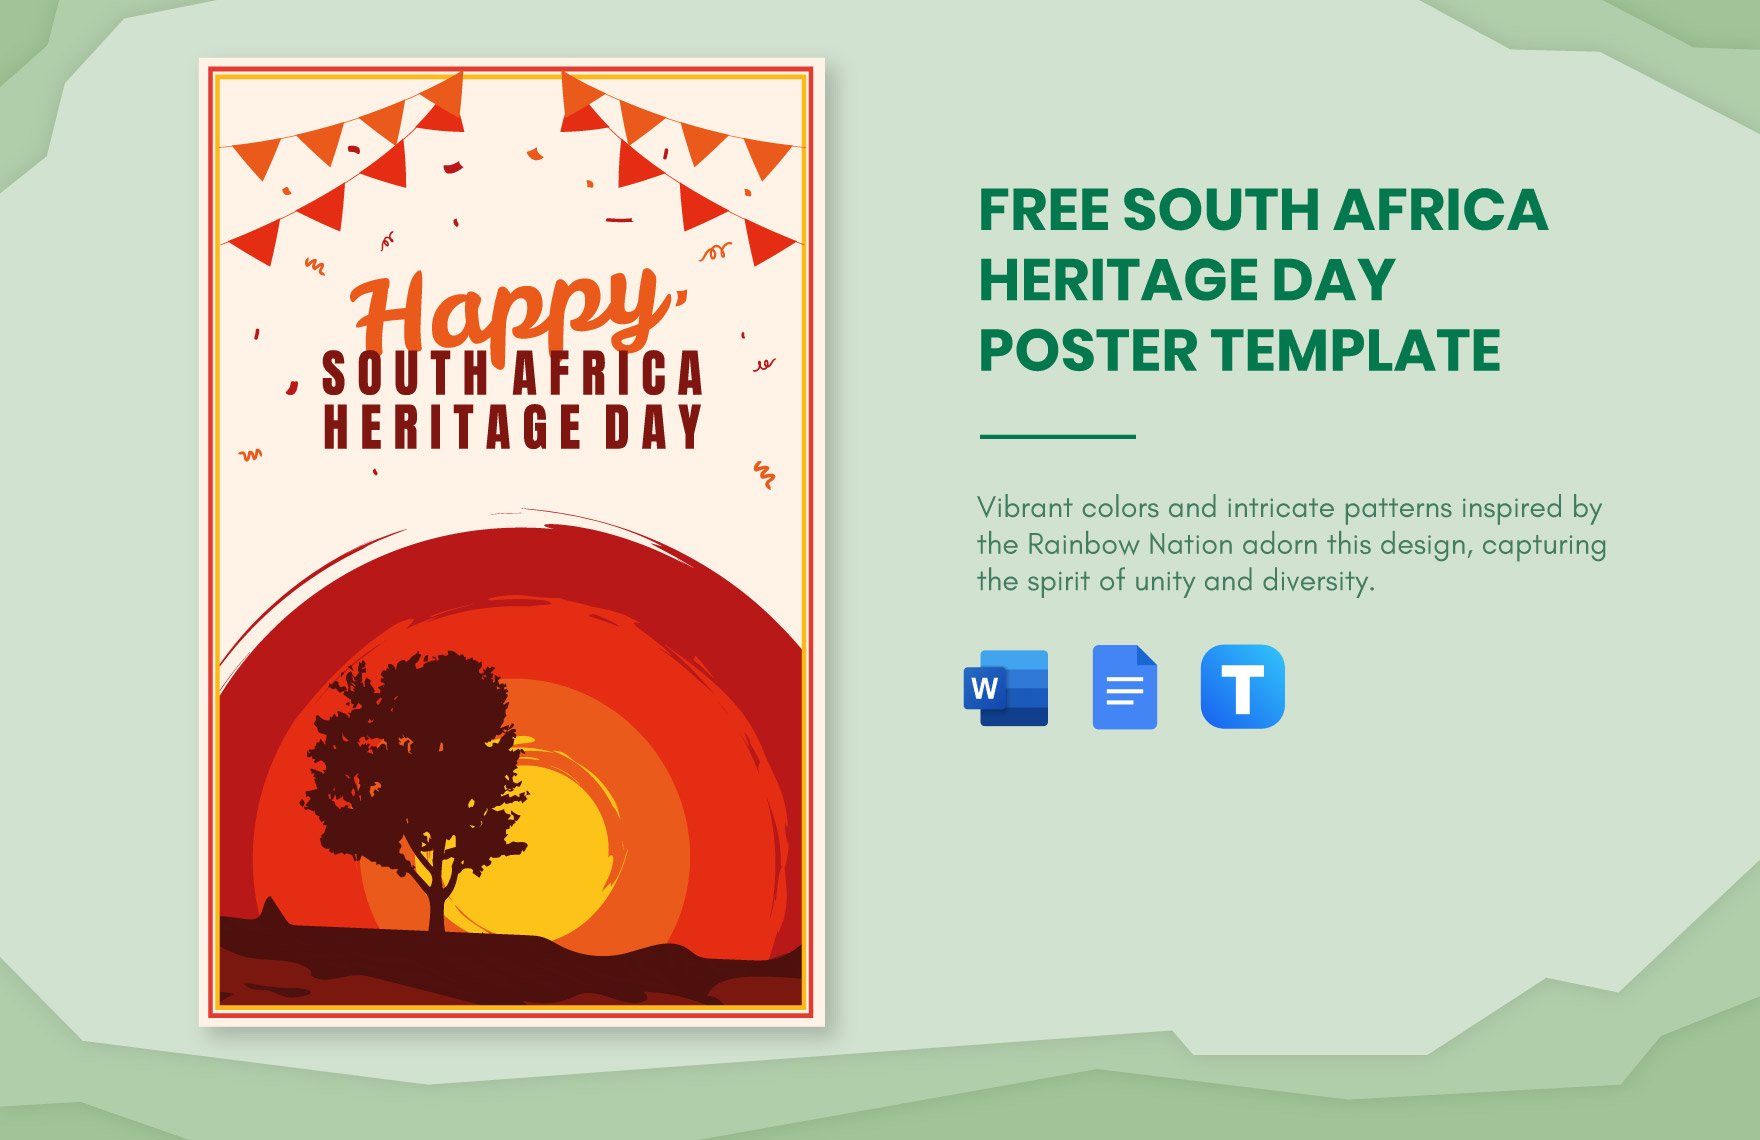 Free South Africa Heritage Day Poster Template in Word, Google Docs